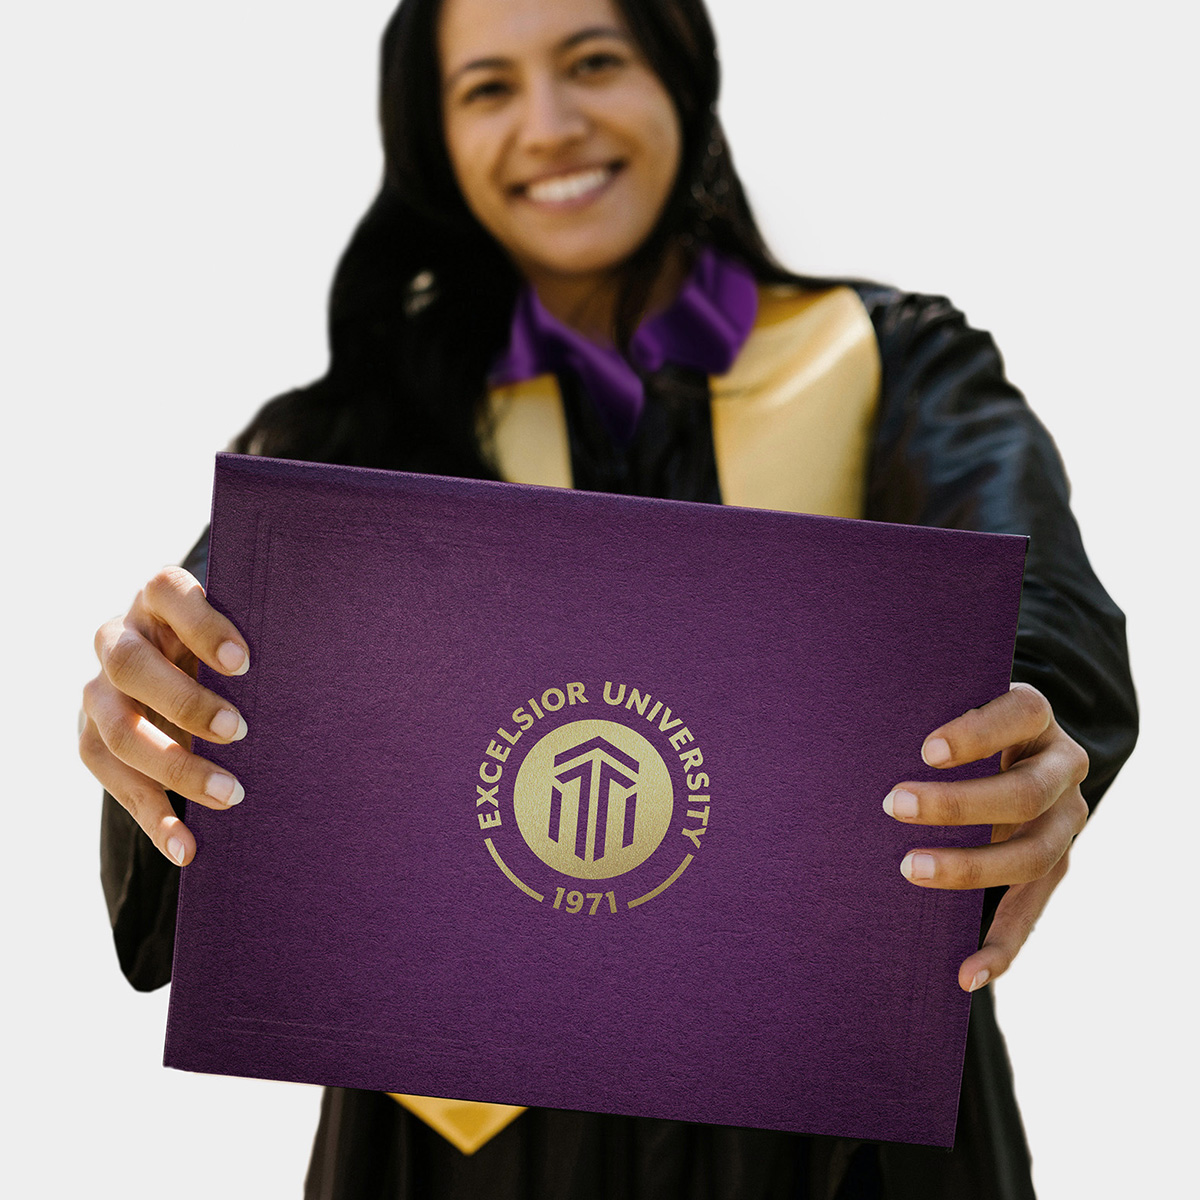 young woman holding diploma